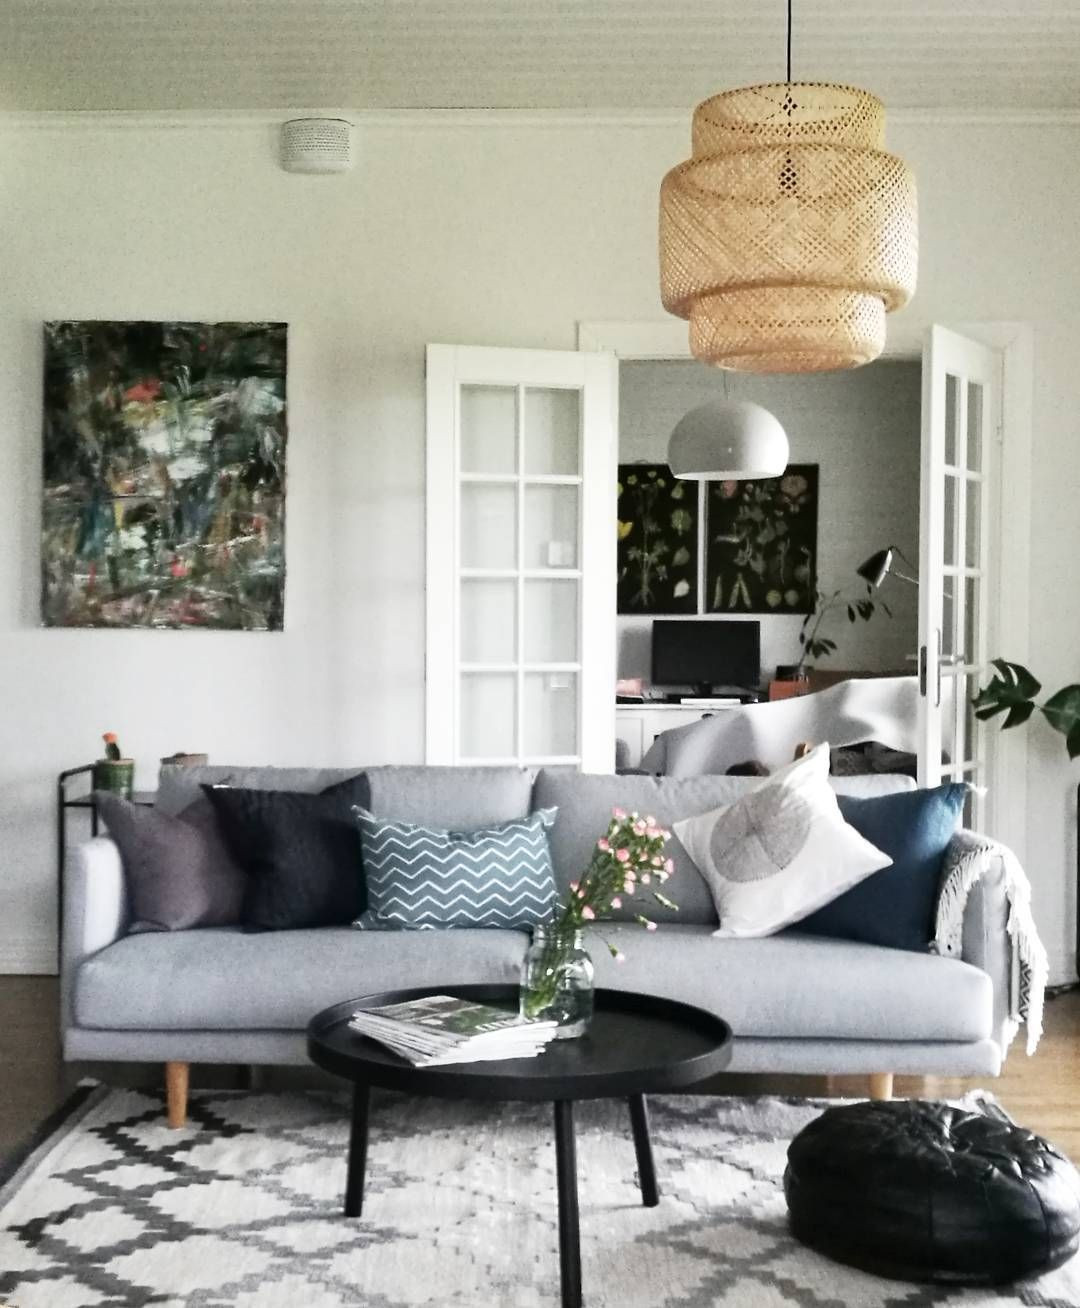 24 Thinks We Can Learn From This Ikea Living Room Lamps - Home ...